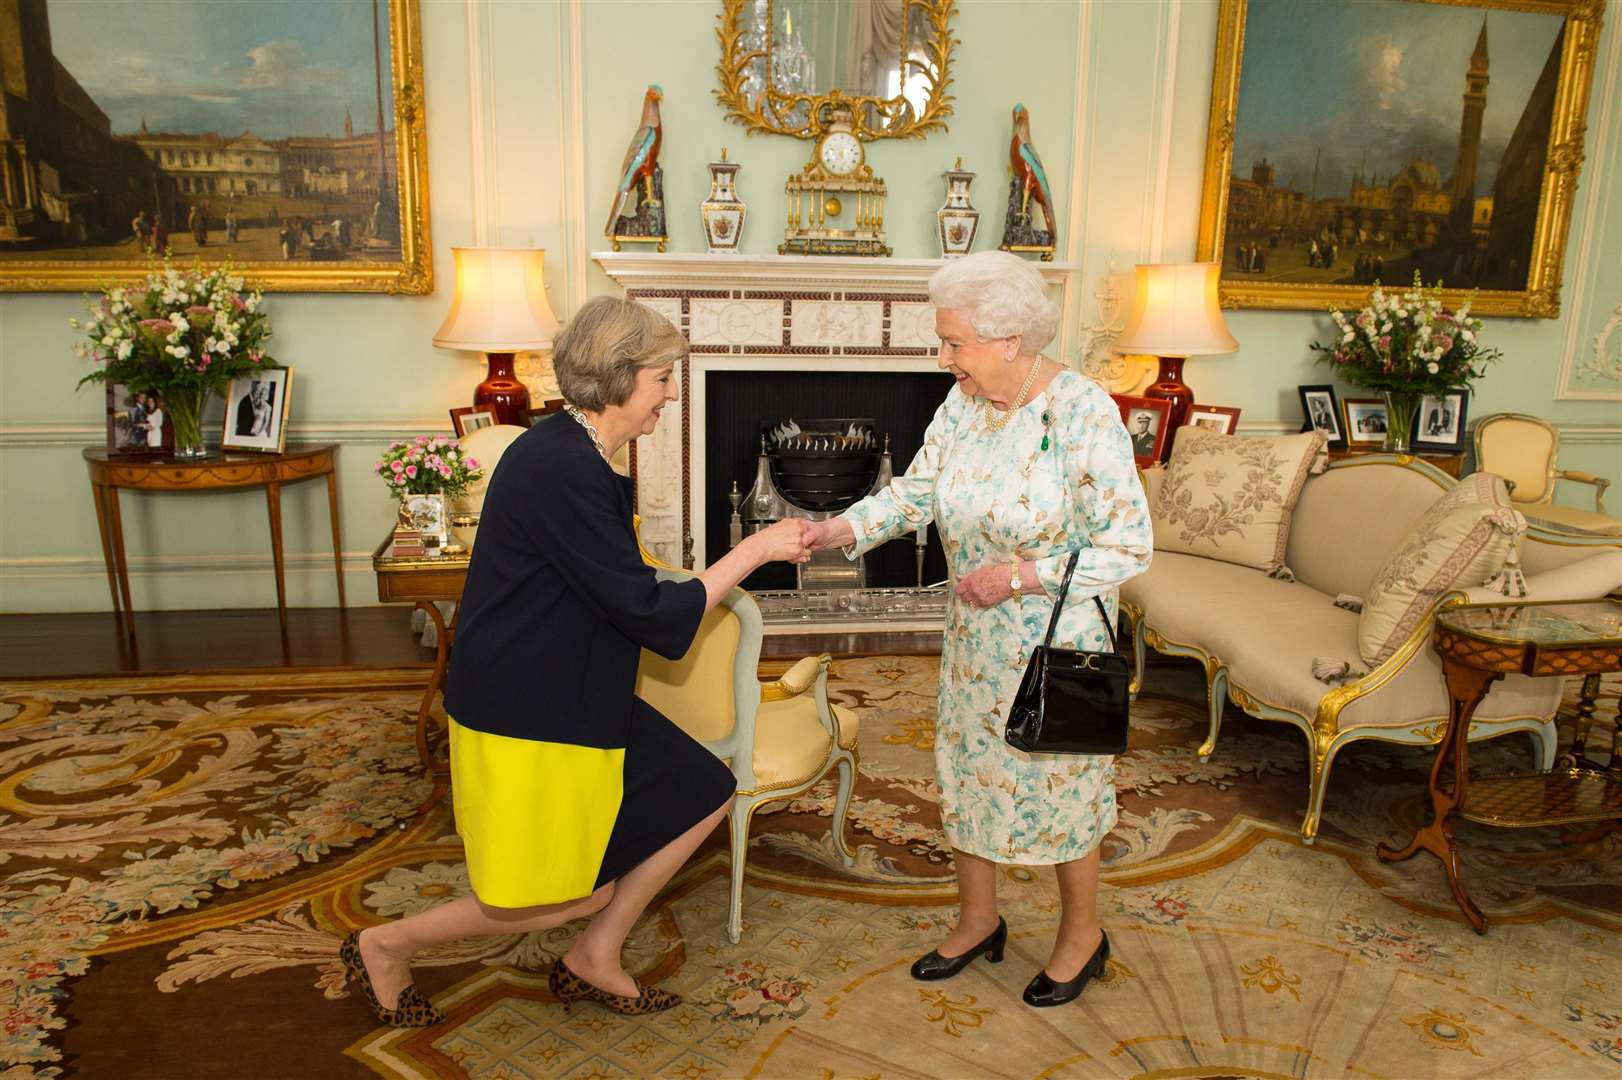 The Queen welcomes Theresa May at an audience in Buckingham Palace where she invited the former home secretary to become prime minister in 2016 (Dominic Lipinski/PA)